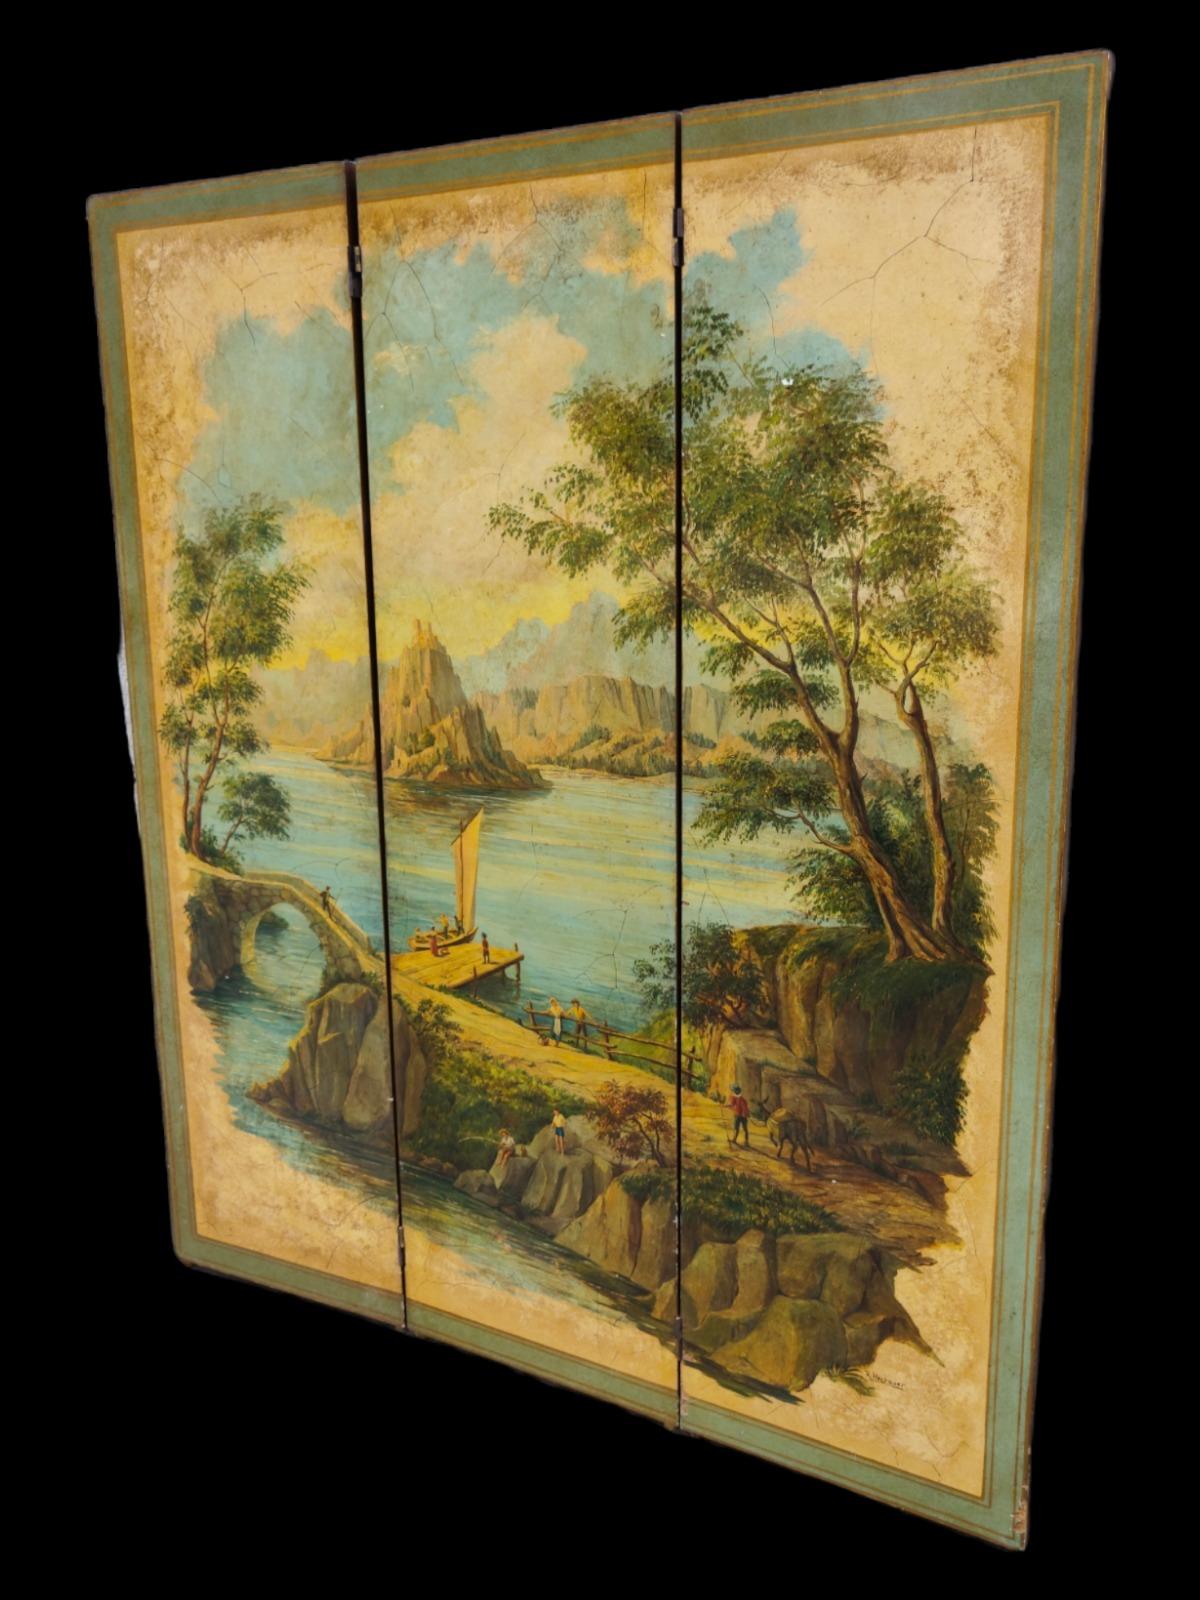 SIGNED HAND-PAINTED GERMAN SCREEN 20th Century 2